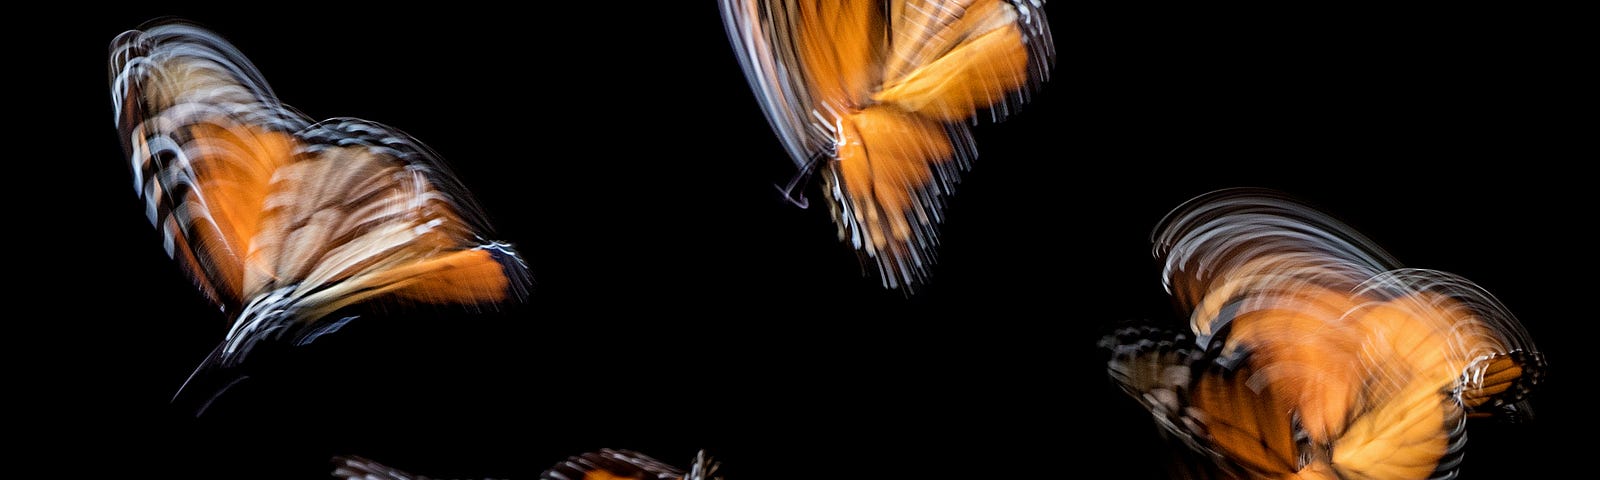 4 images of a butterfy in flight